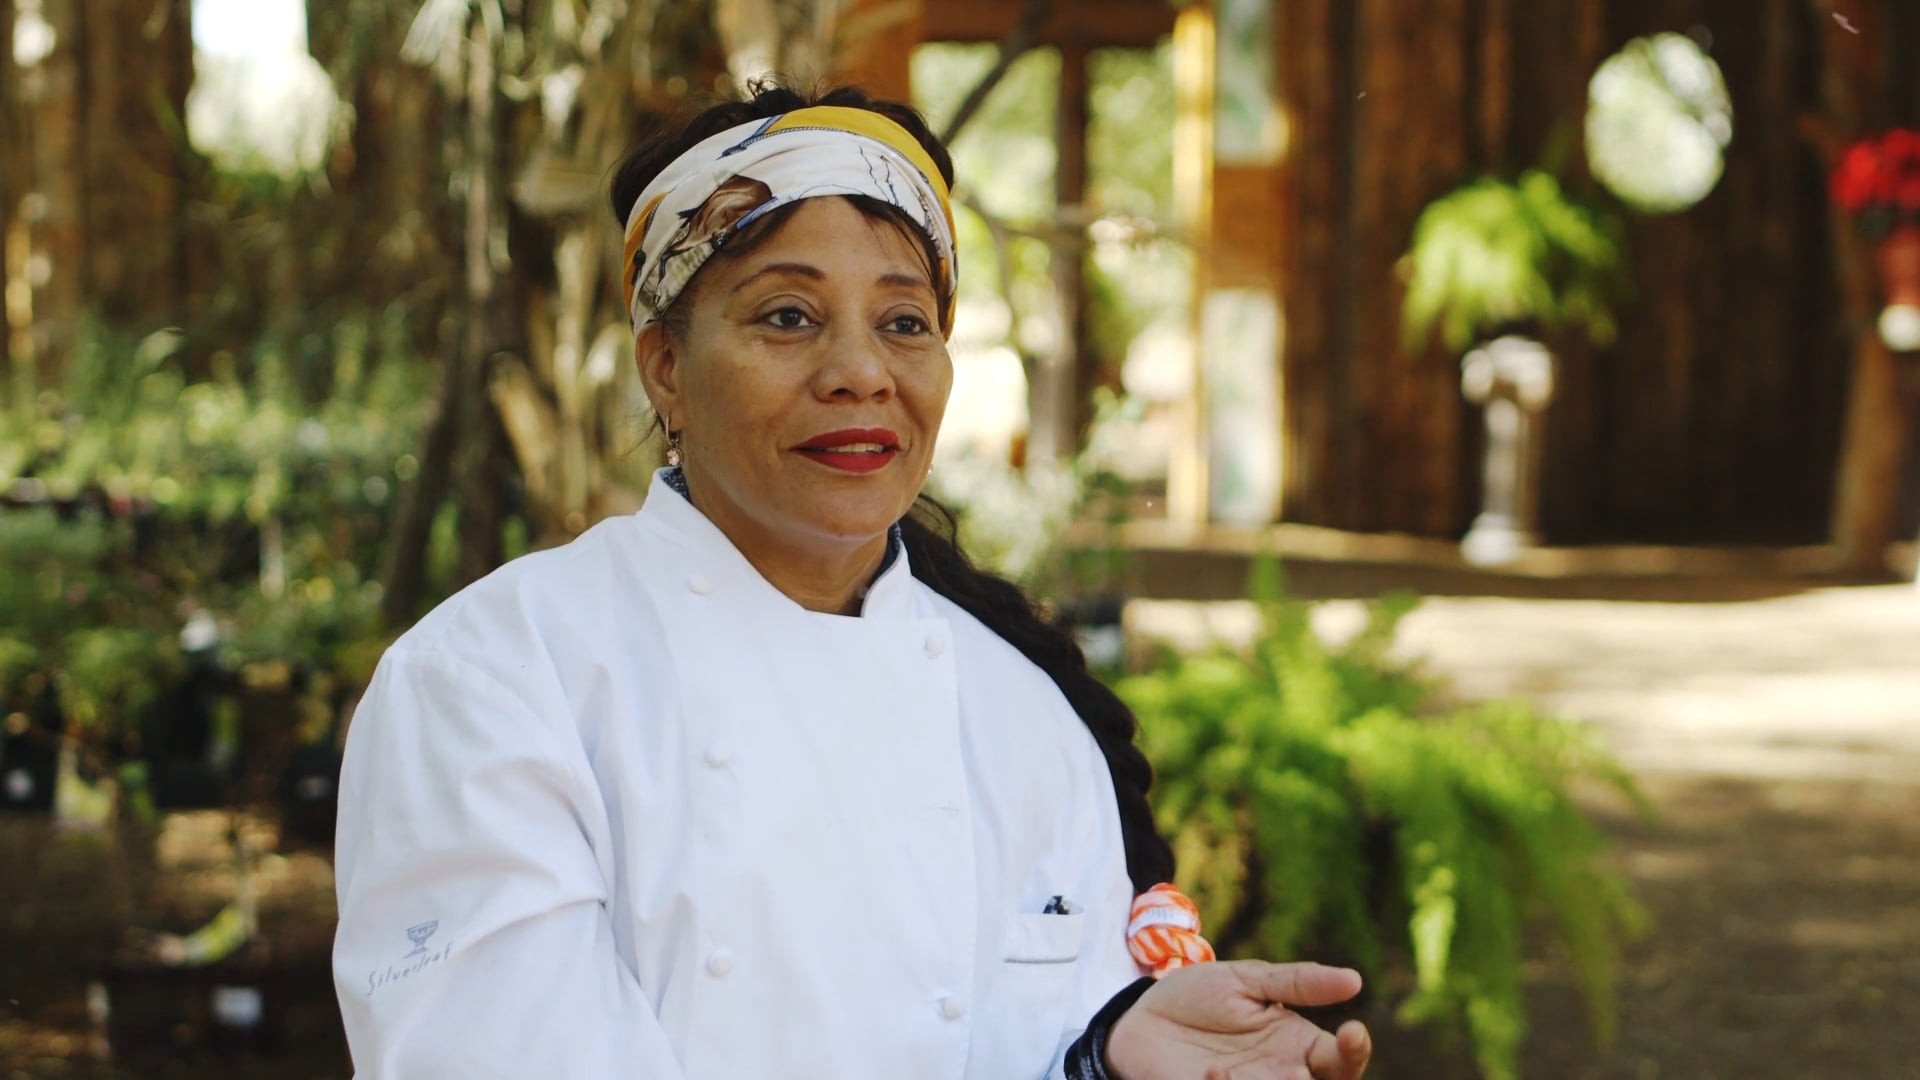 Chef Aurore | The Love of Cooking